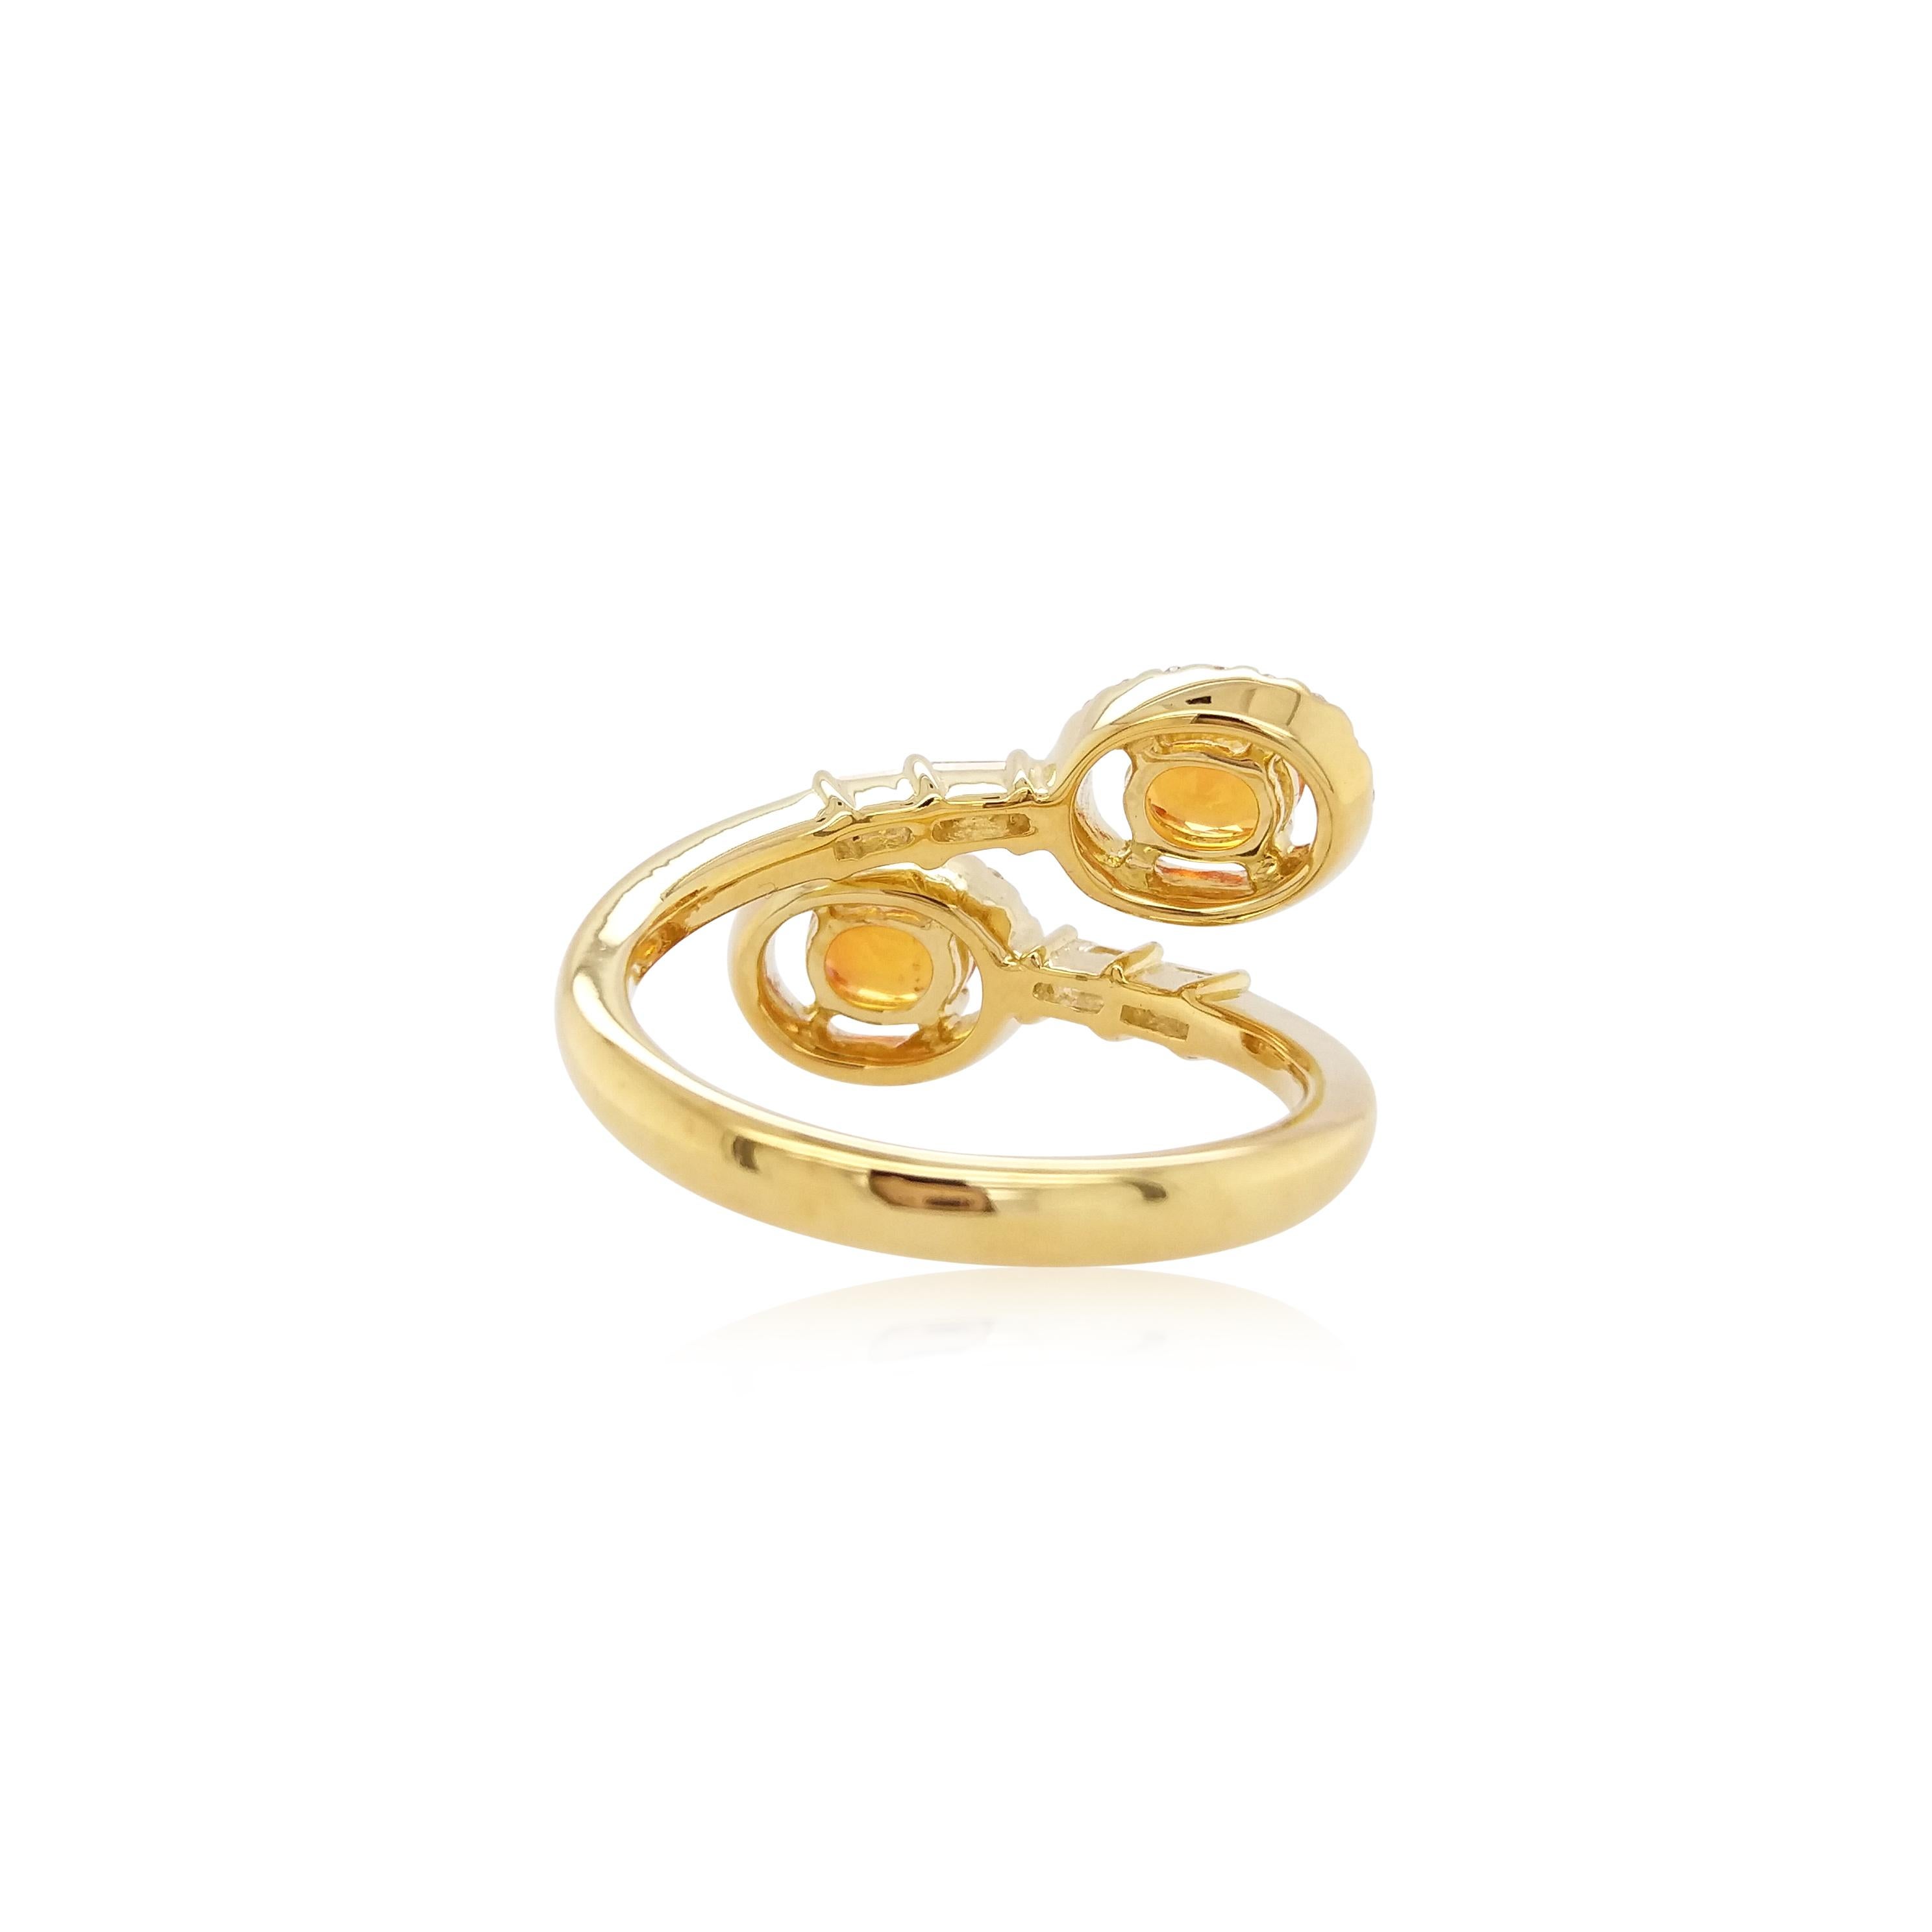 Inspired by the beauty of the sunshine, this ring showcases the elegance of orange sapphires. Featuring the oval-shaped golden orange sapphires designed to elegantly rest upon the finger, combine this edgy cocktail ring with any outfit to make a